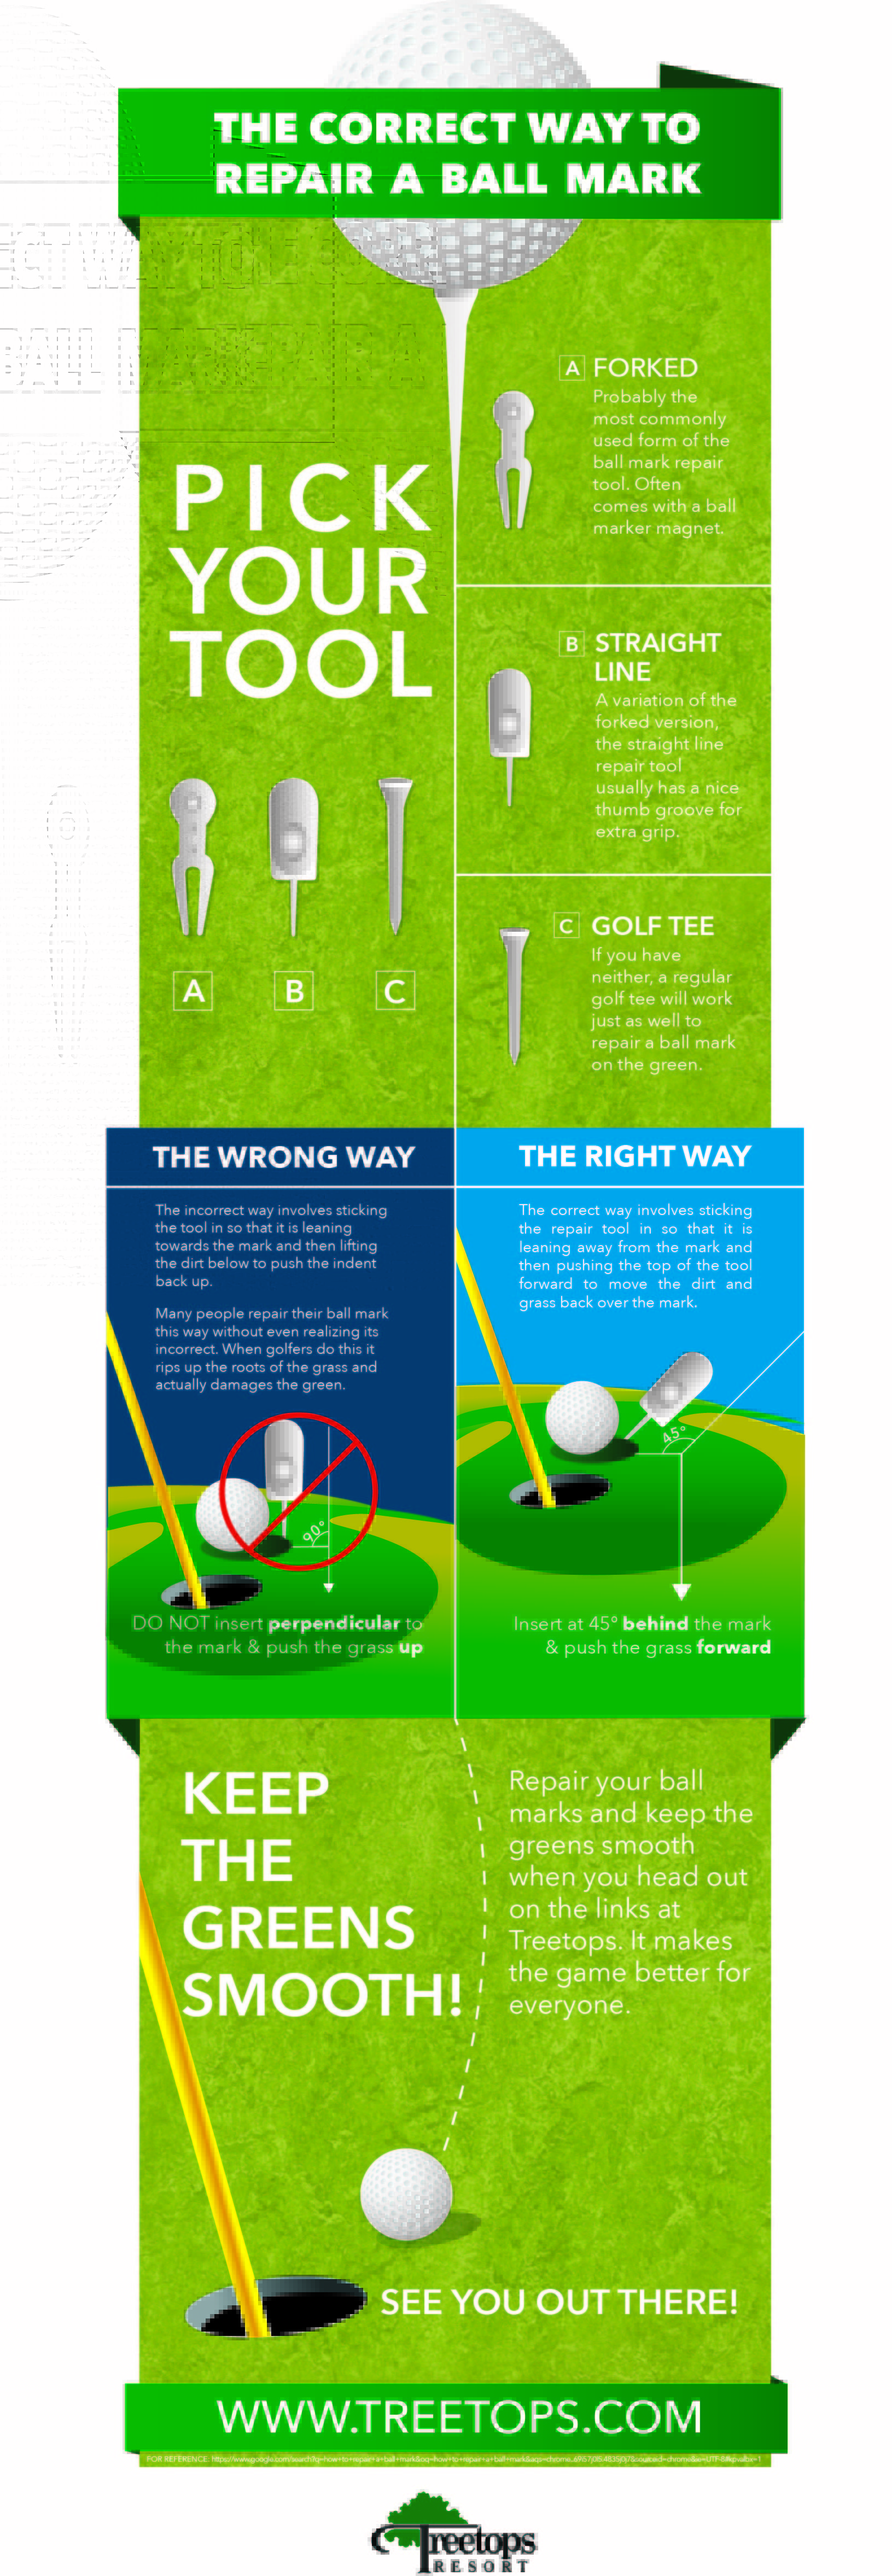 This infographic shows the correct way to repair a ball mark without damaging the green